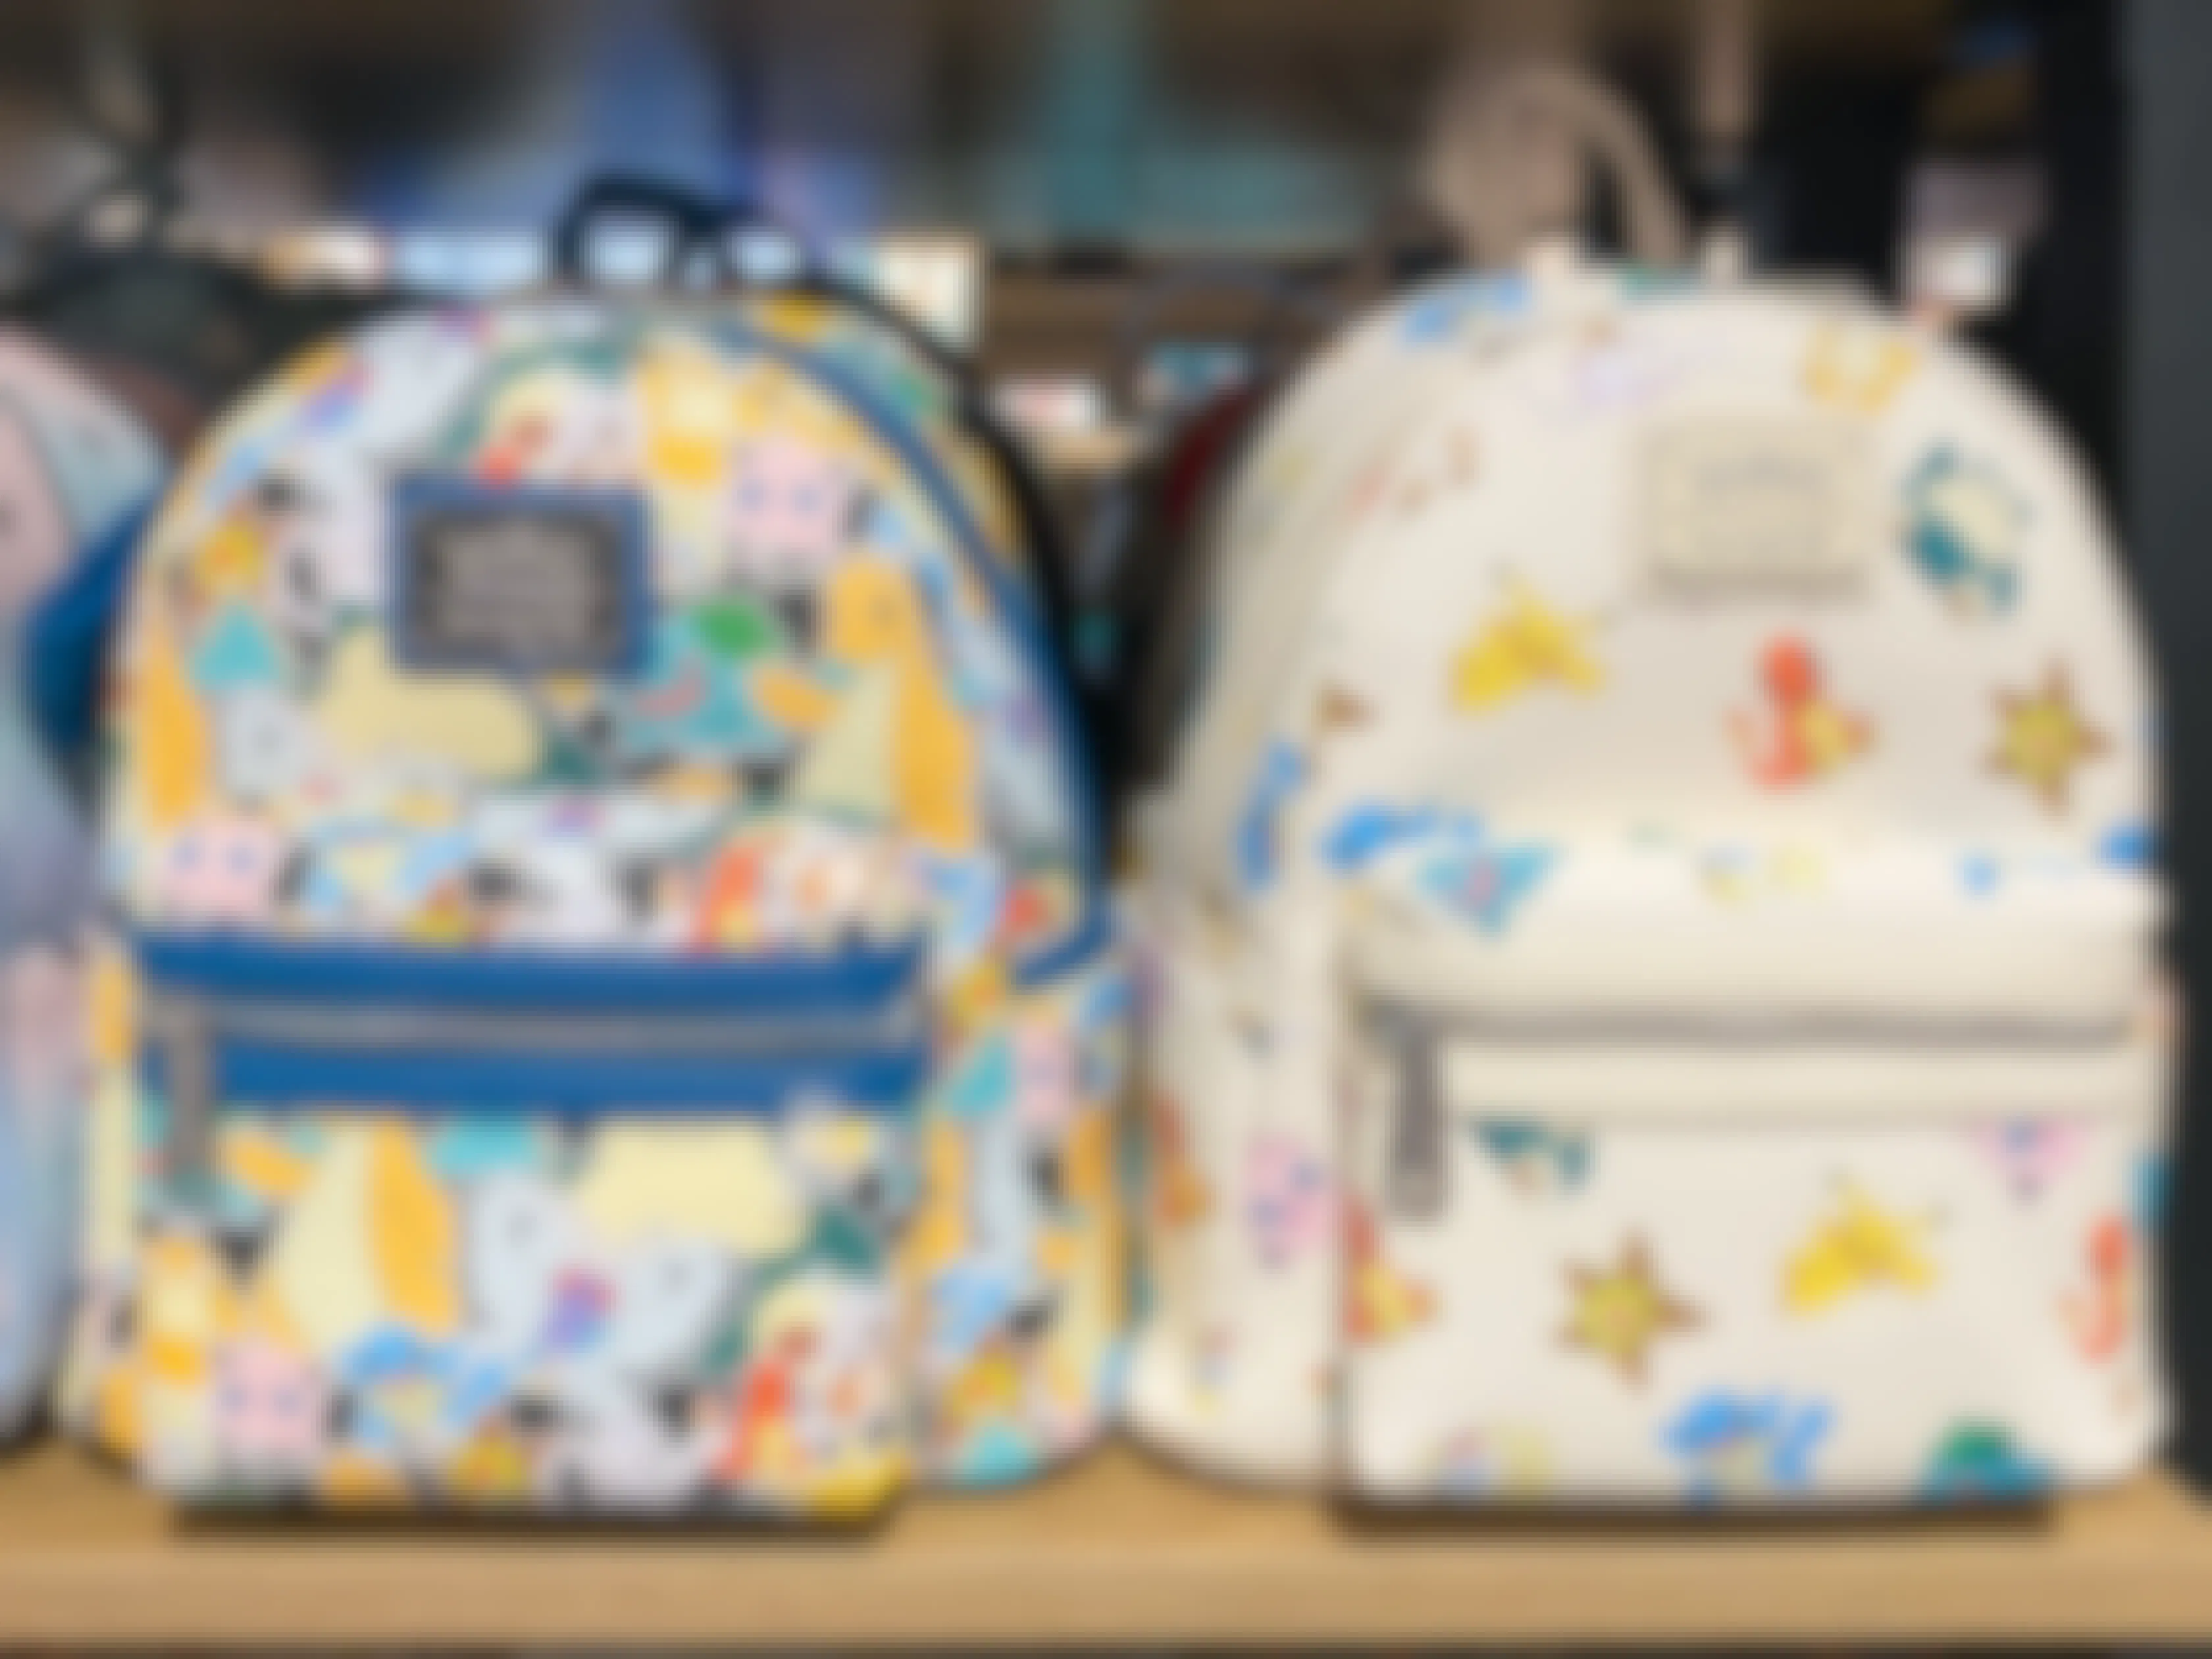 Pokemon Loungefly backpack purses on a shelf at BoxLunch